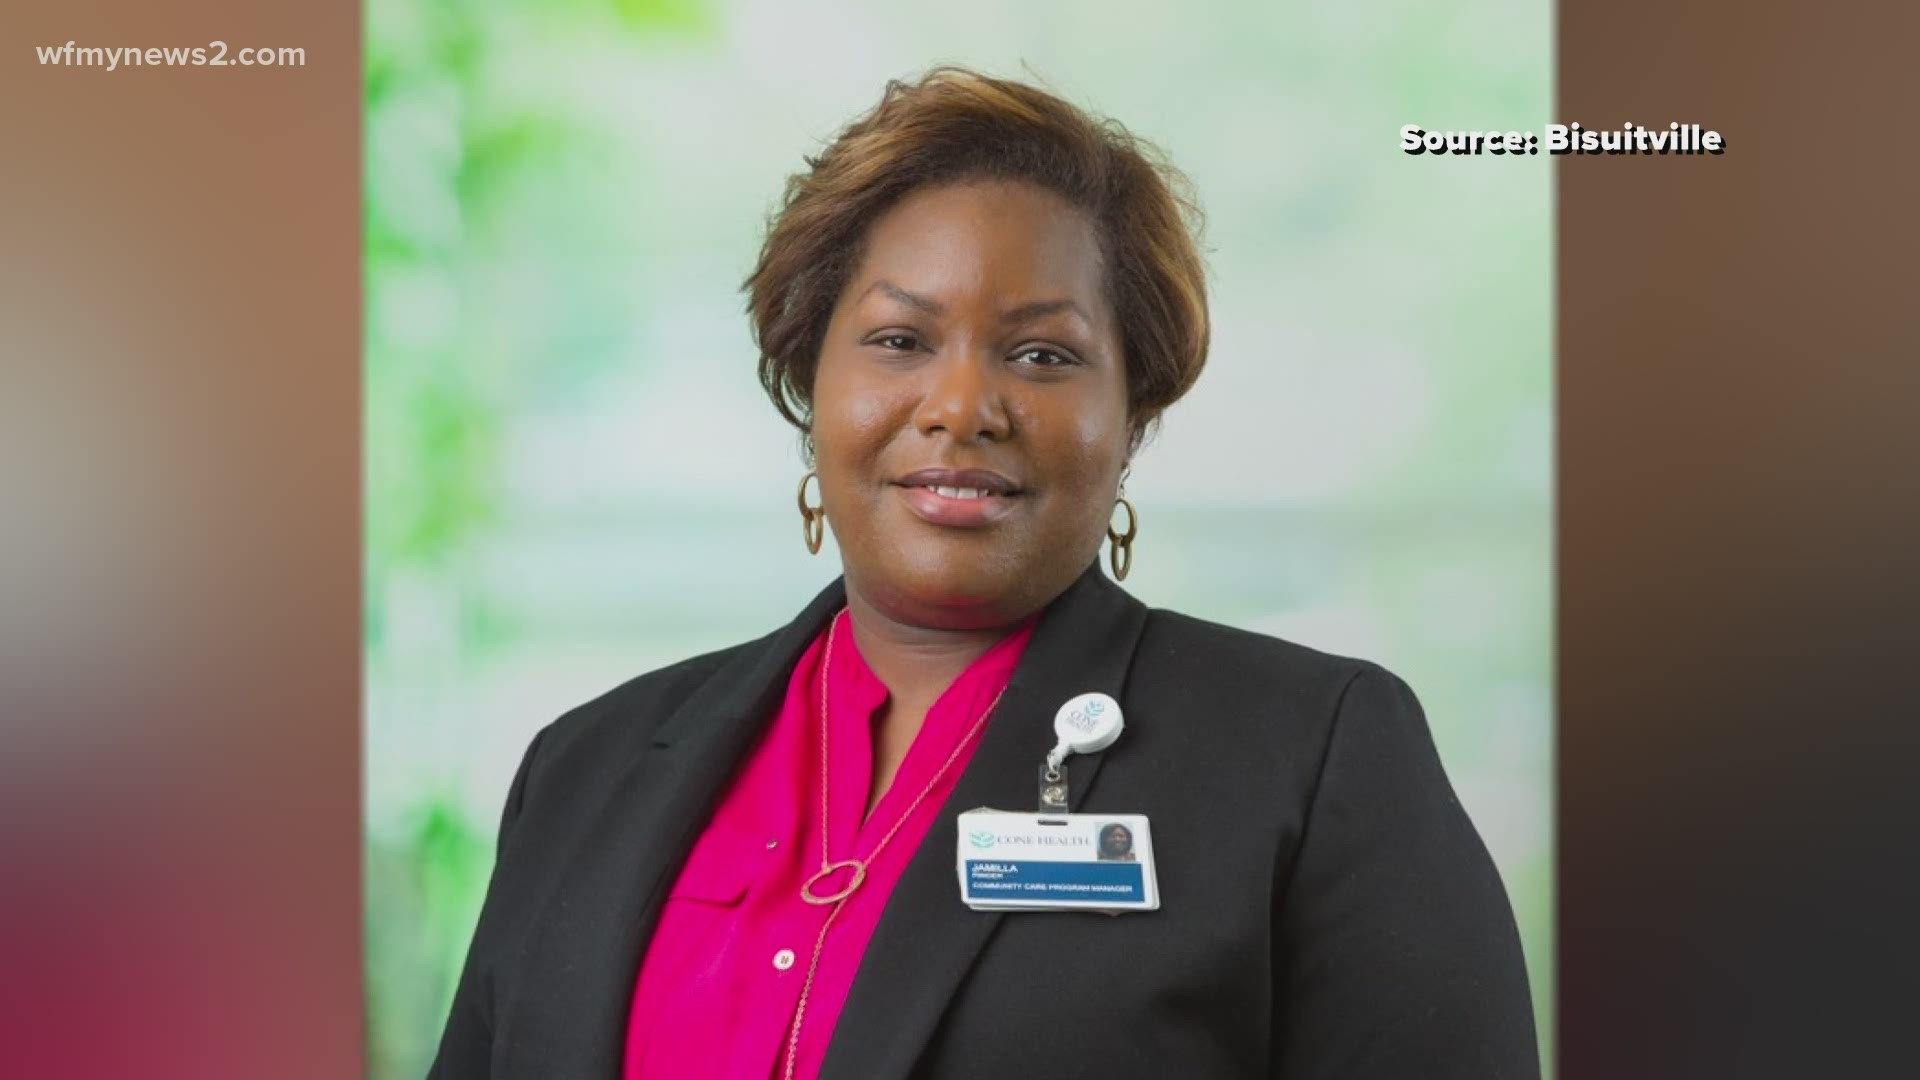 Jamilla Pinder will be honored by Biscuitville during Black History Month. Pinder, a Cone Health employee, helped plan Cone Health’s COVID-19 testing events.